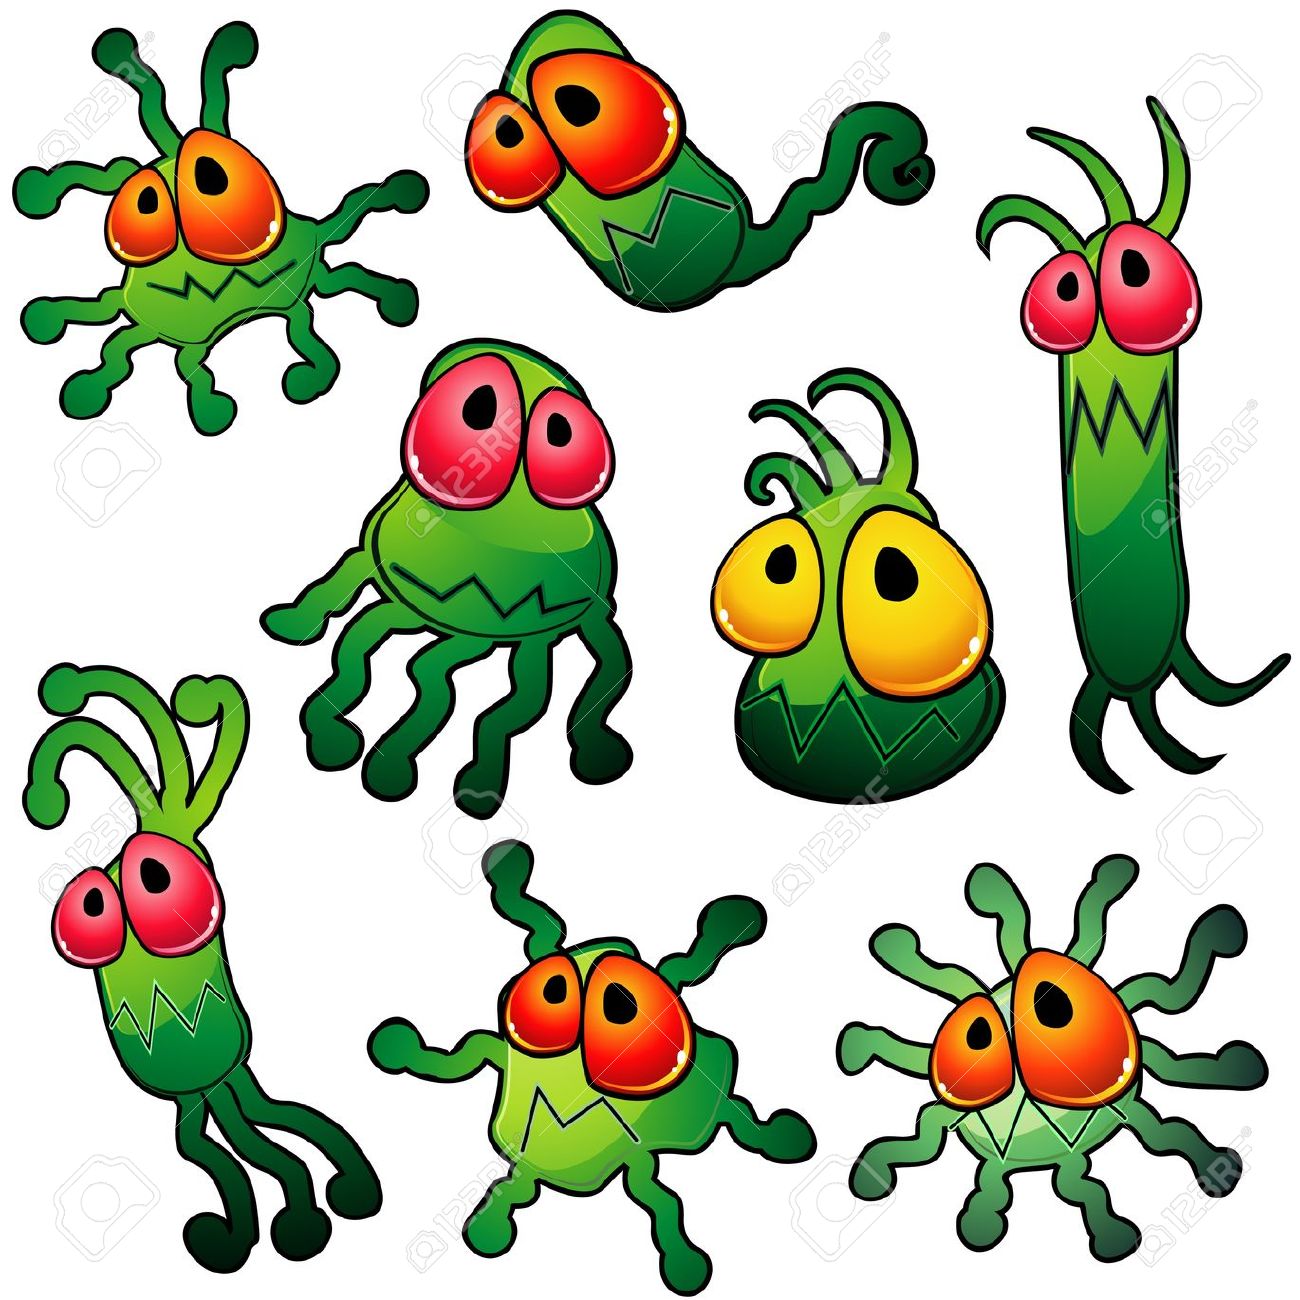 Bacteria clipart germ. Free download best 